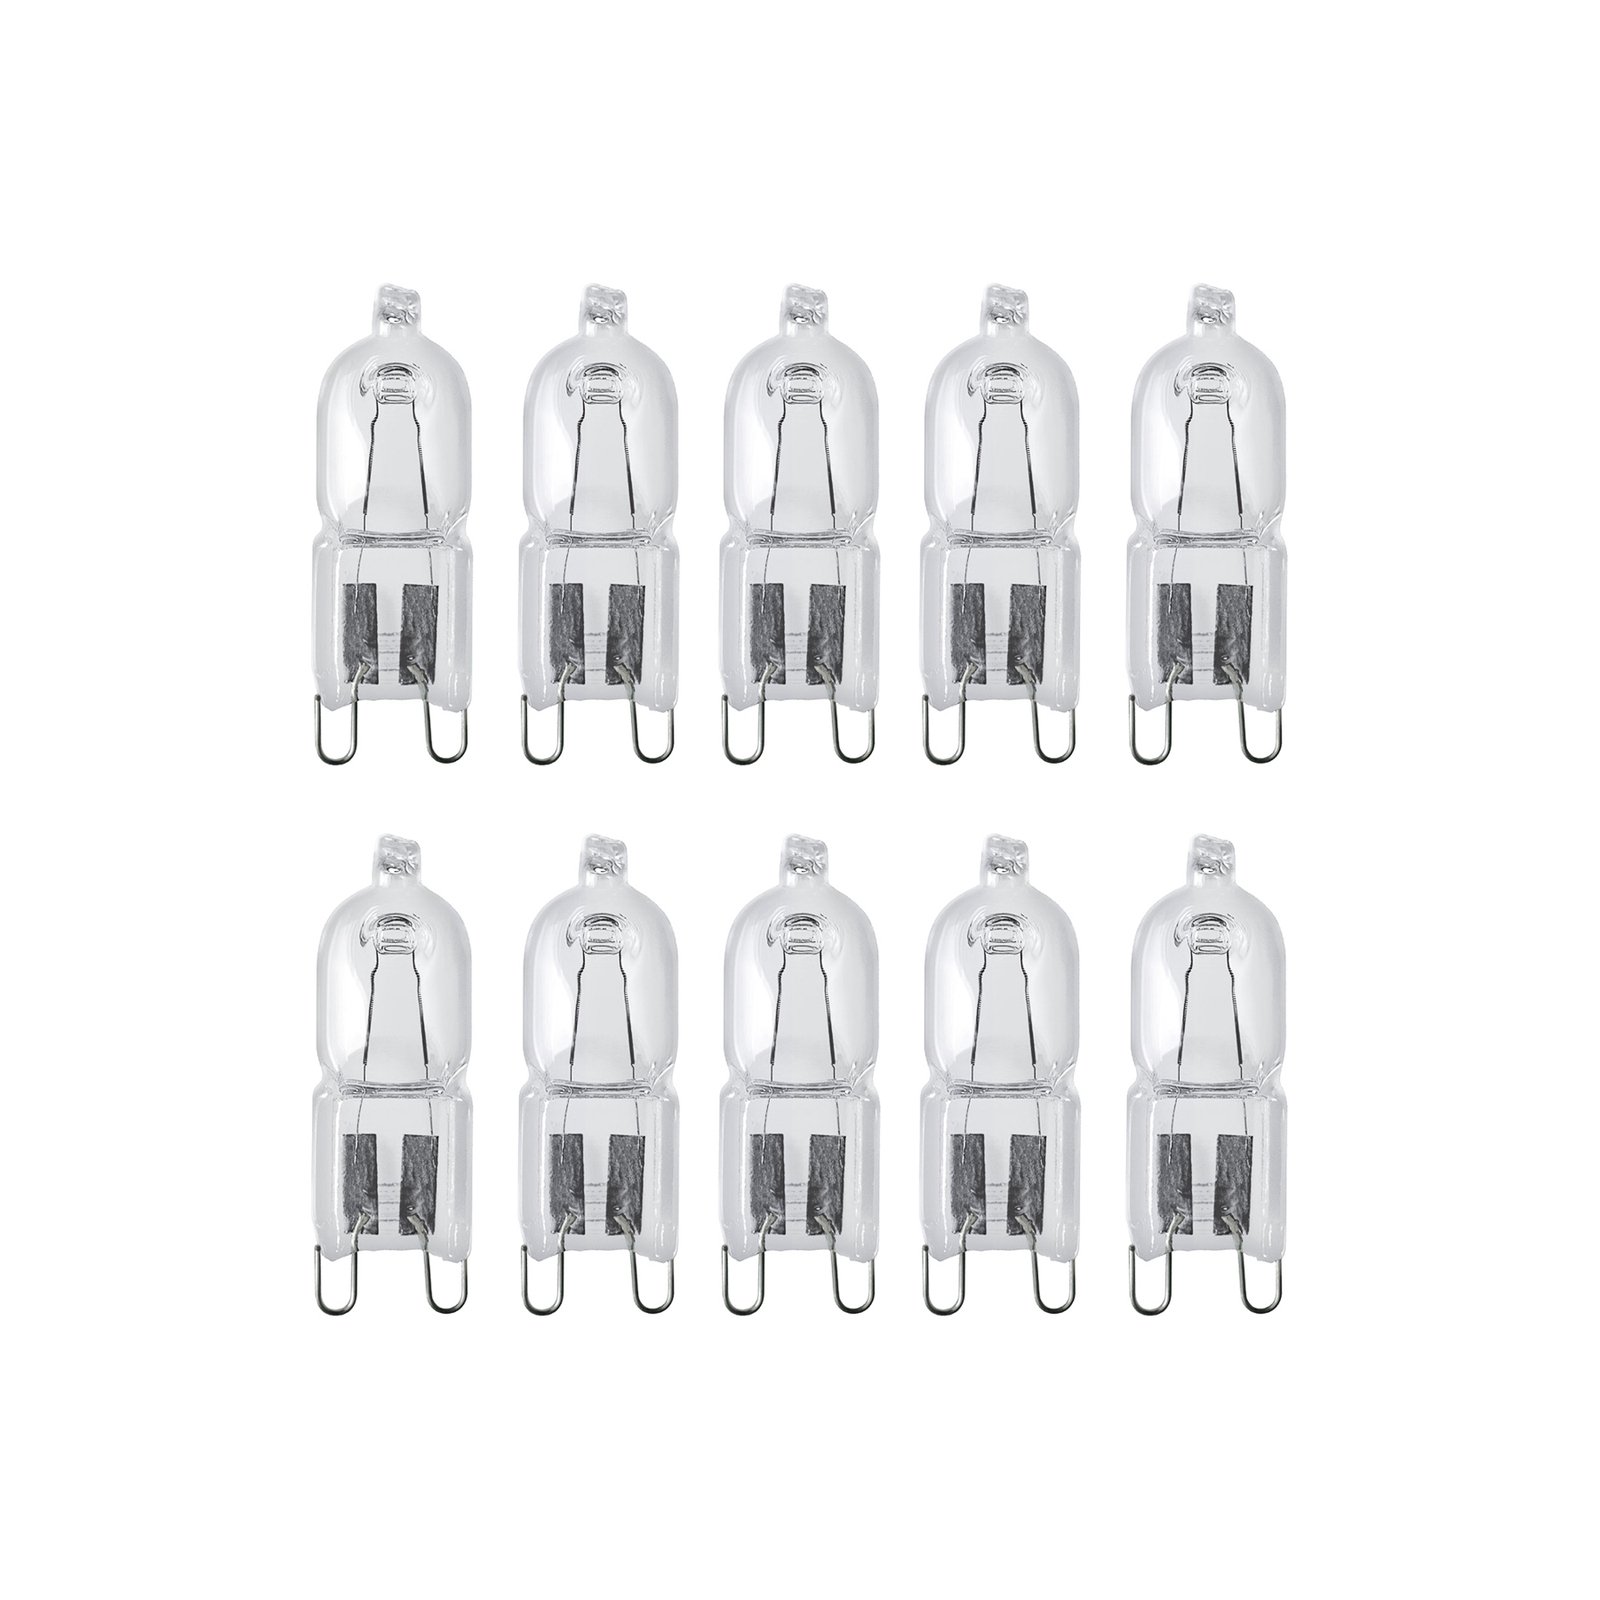 Halopin halogen bulb 60 W clear 2,000 h 10-pack